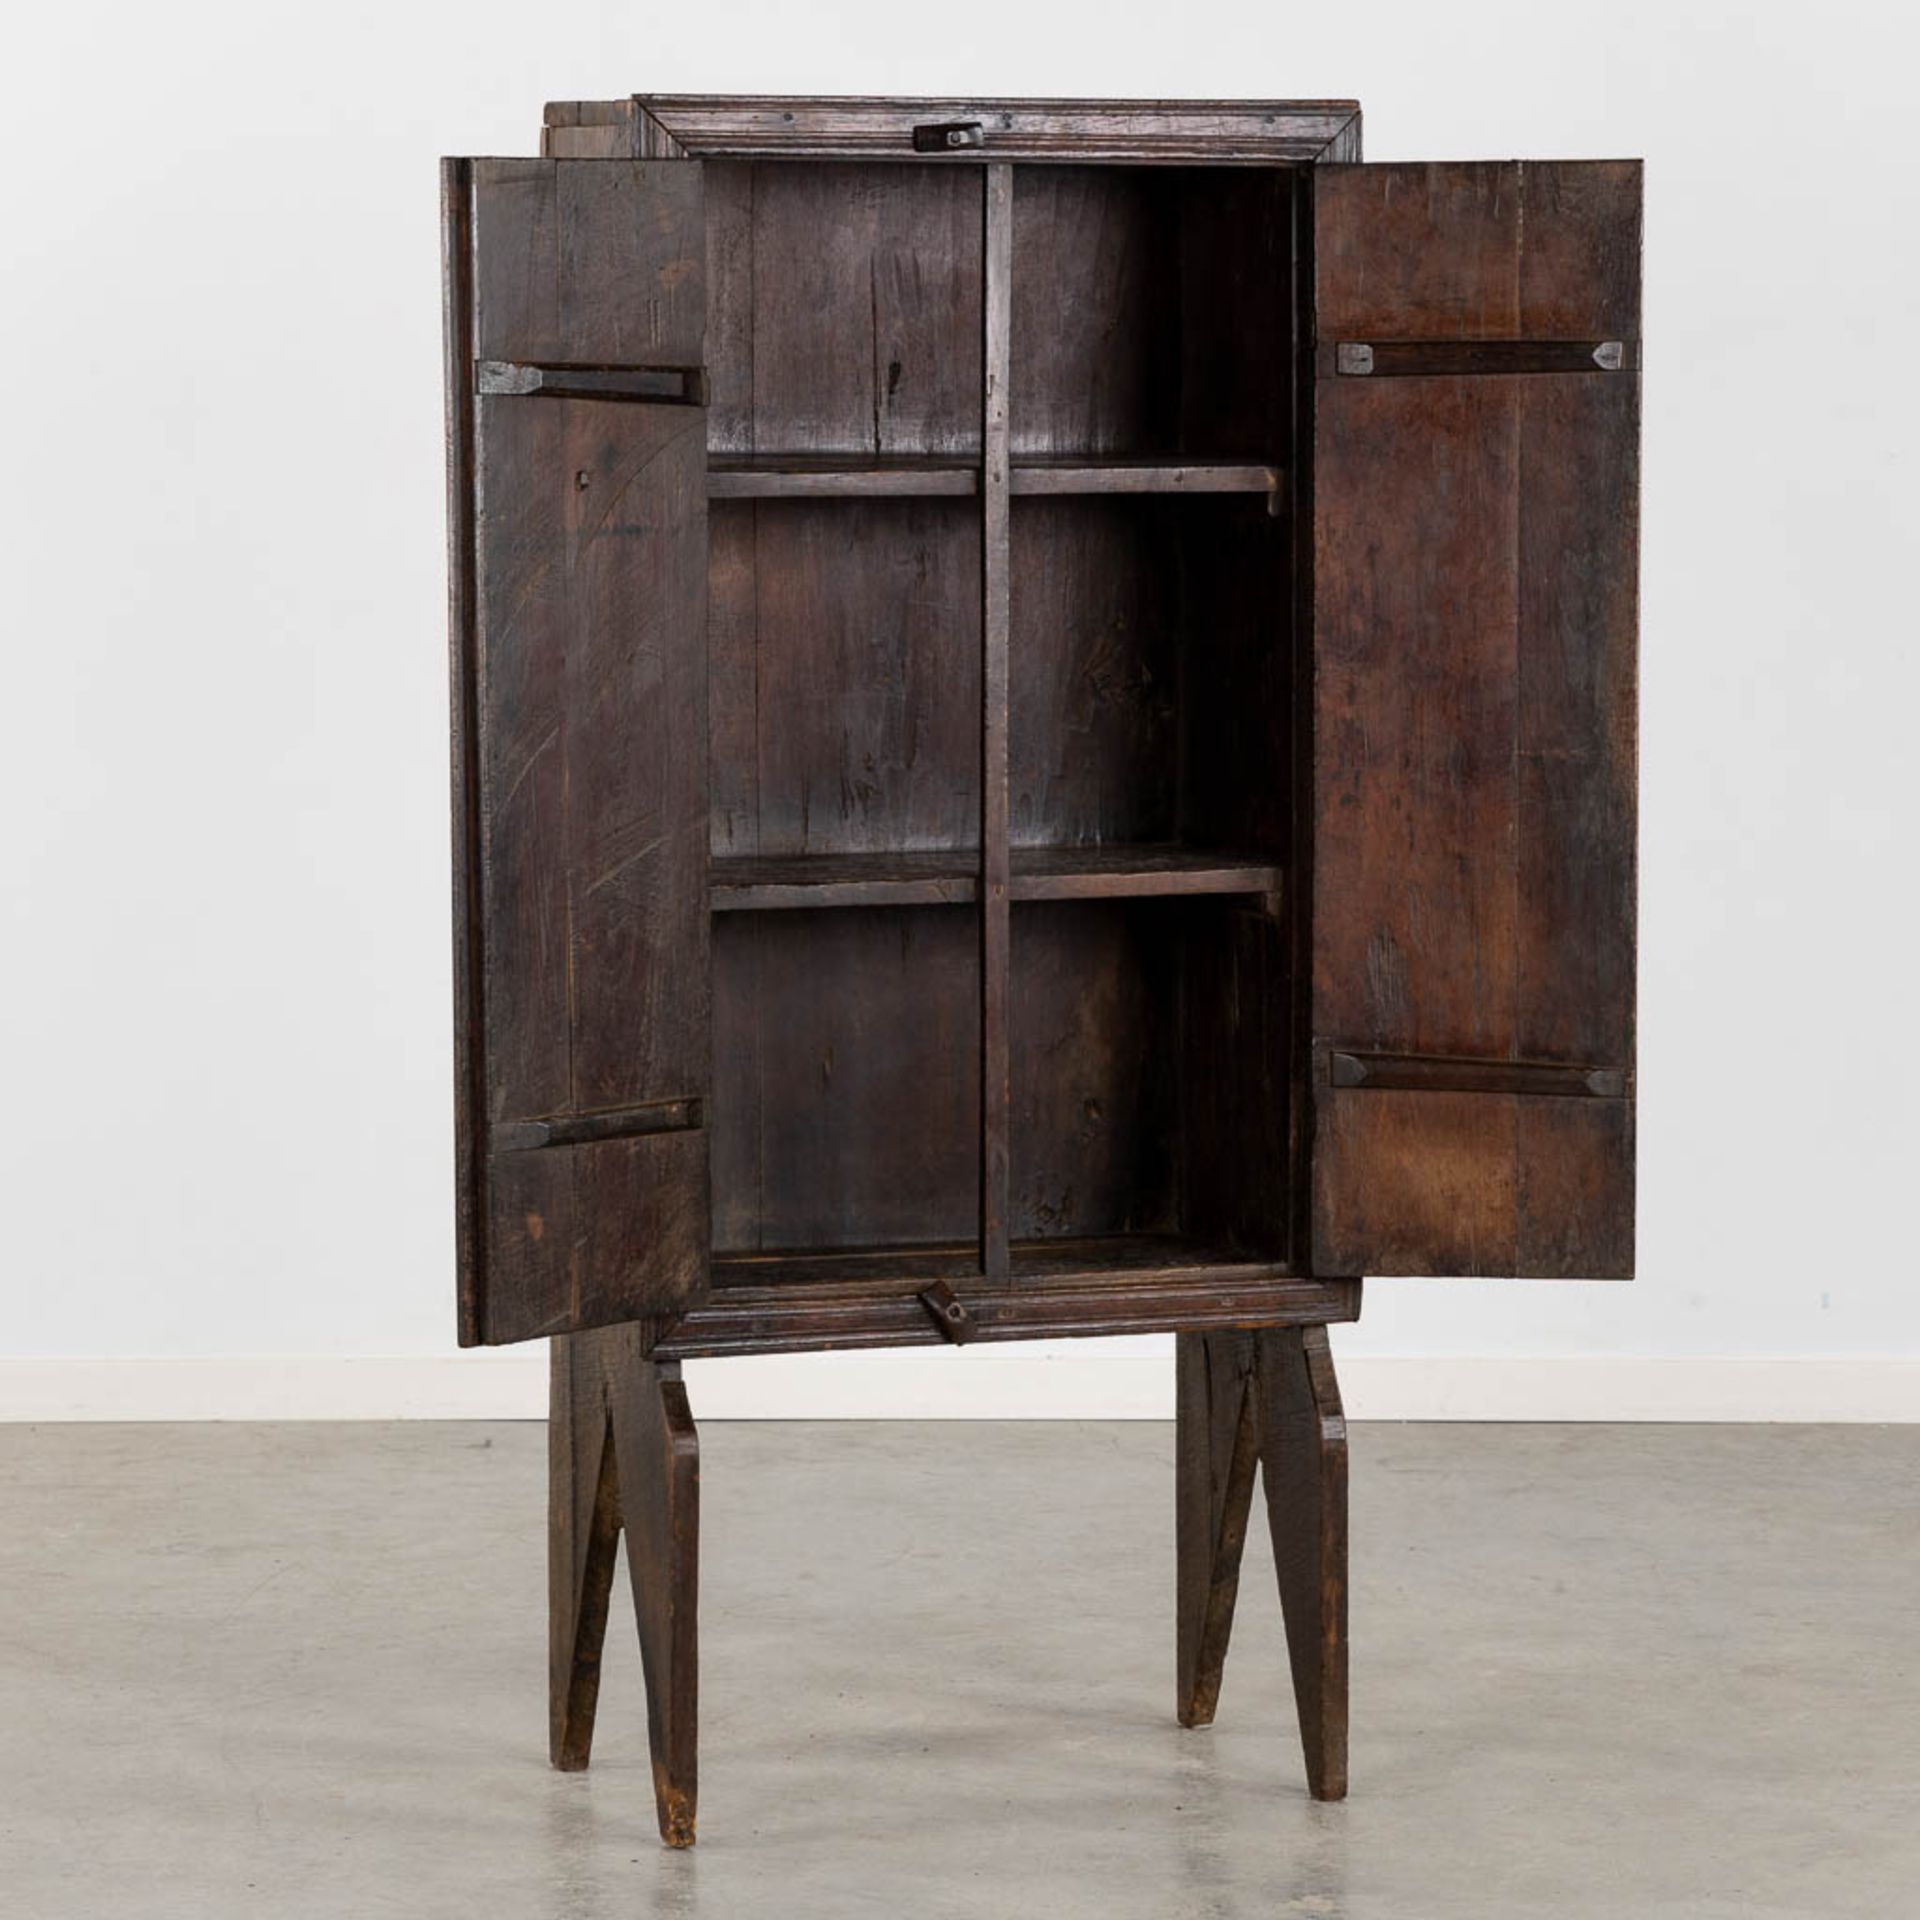 An antique two-door cabinet, hardwood. (L:36 x W:64 x H:143 cm) - Image 3 of 10